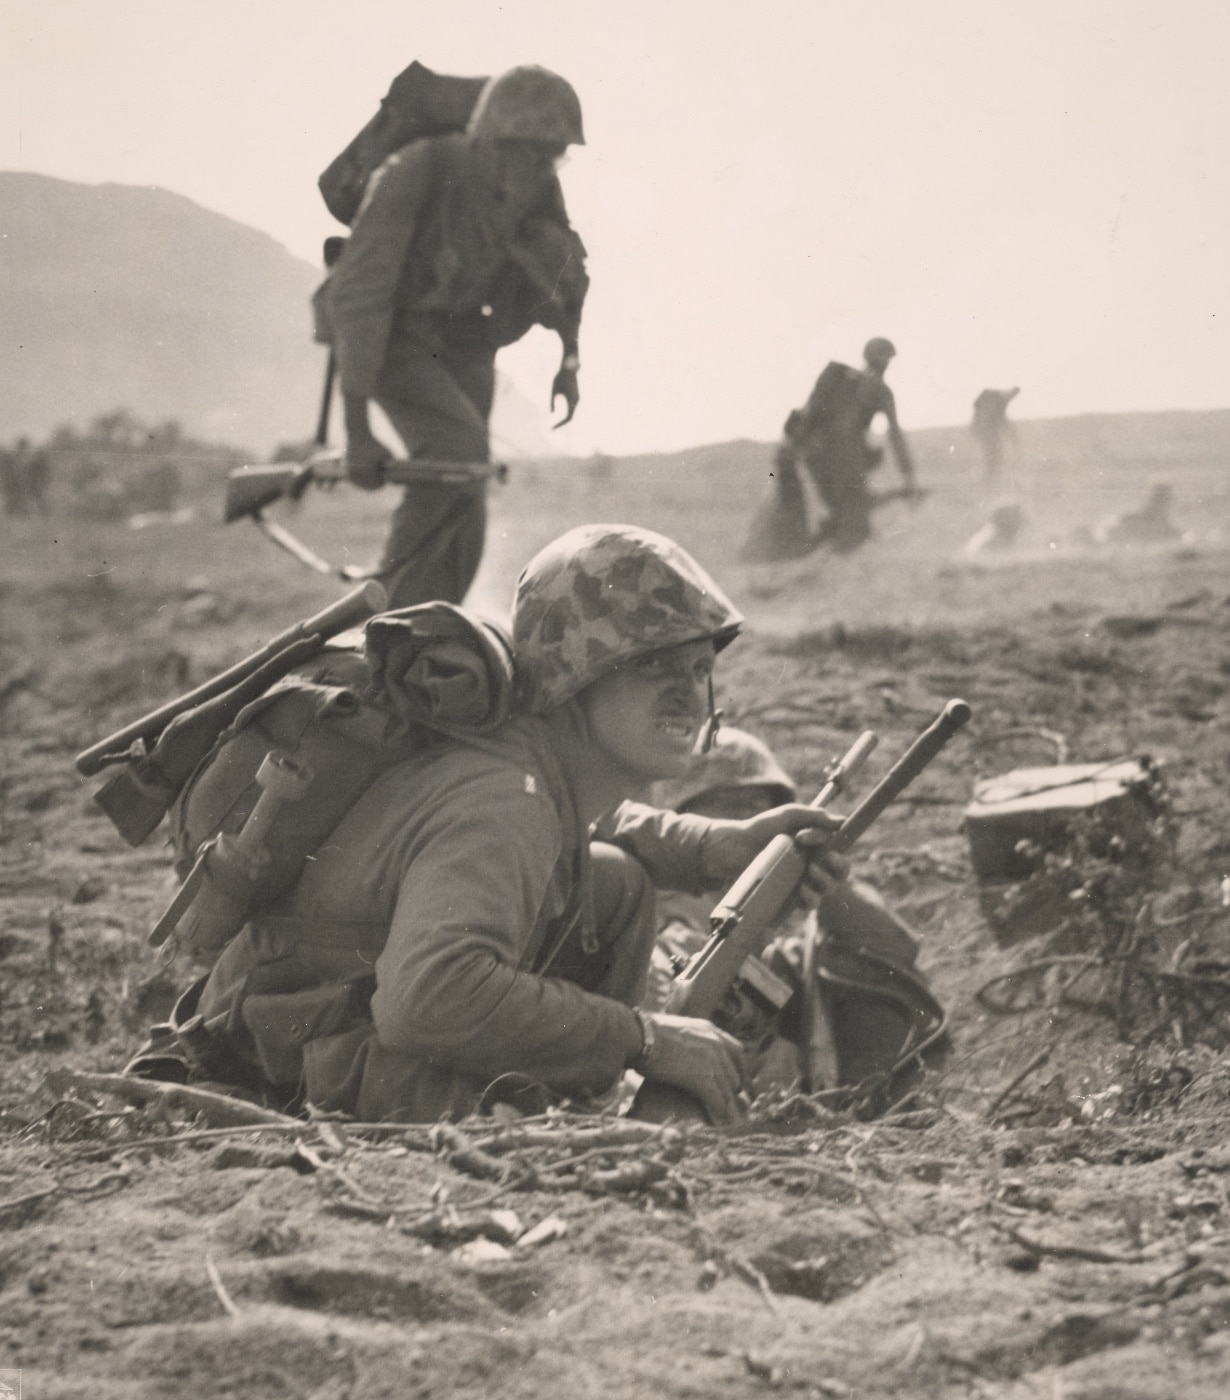 In this photo we see a U.S. Marine with a M1 Carbine that has a rifle grenade attachment and ammunition. Behind him is another Marine carrying a 12 gauge shotgun. These were common firearms carried by American troops in this part of the island. 